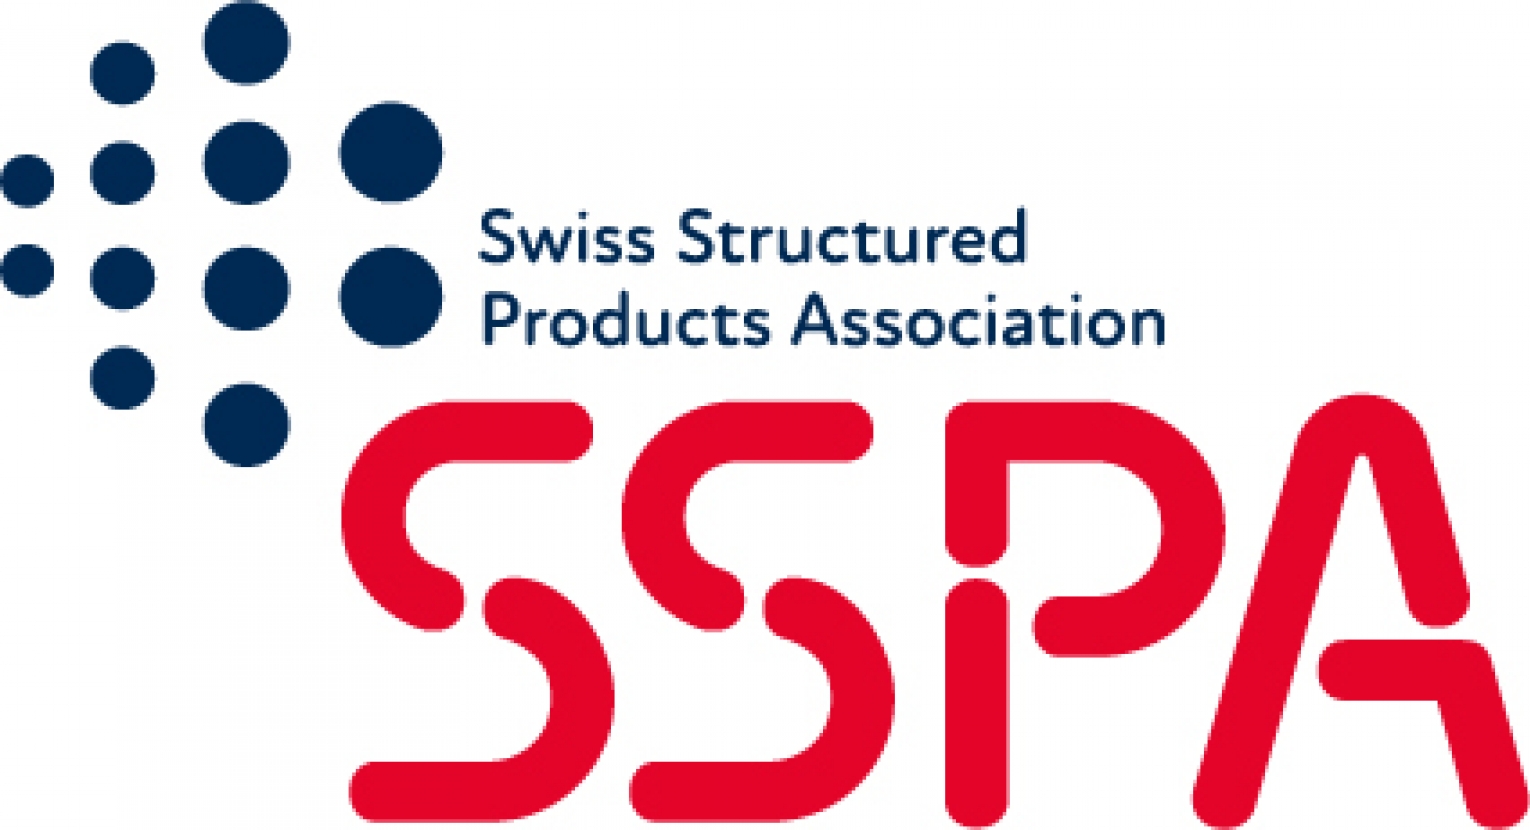 Swiss Structured Products Association